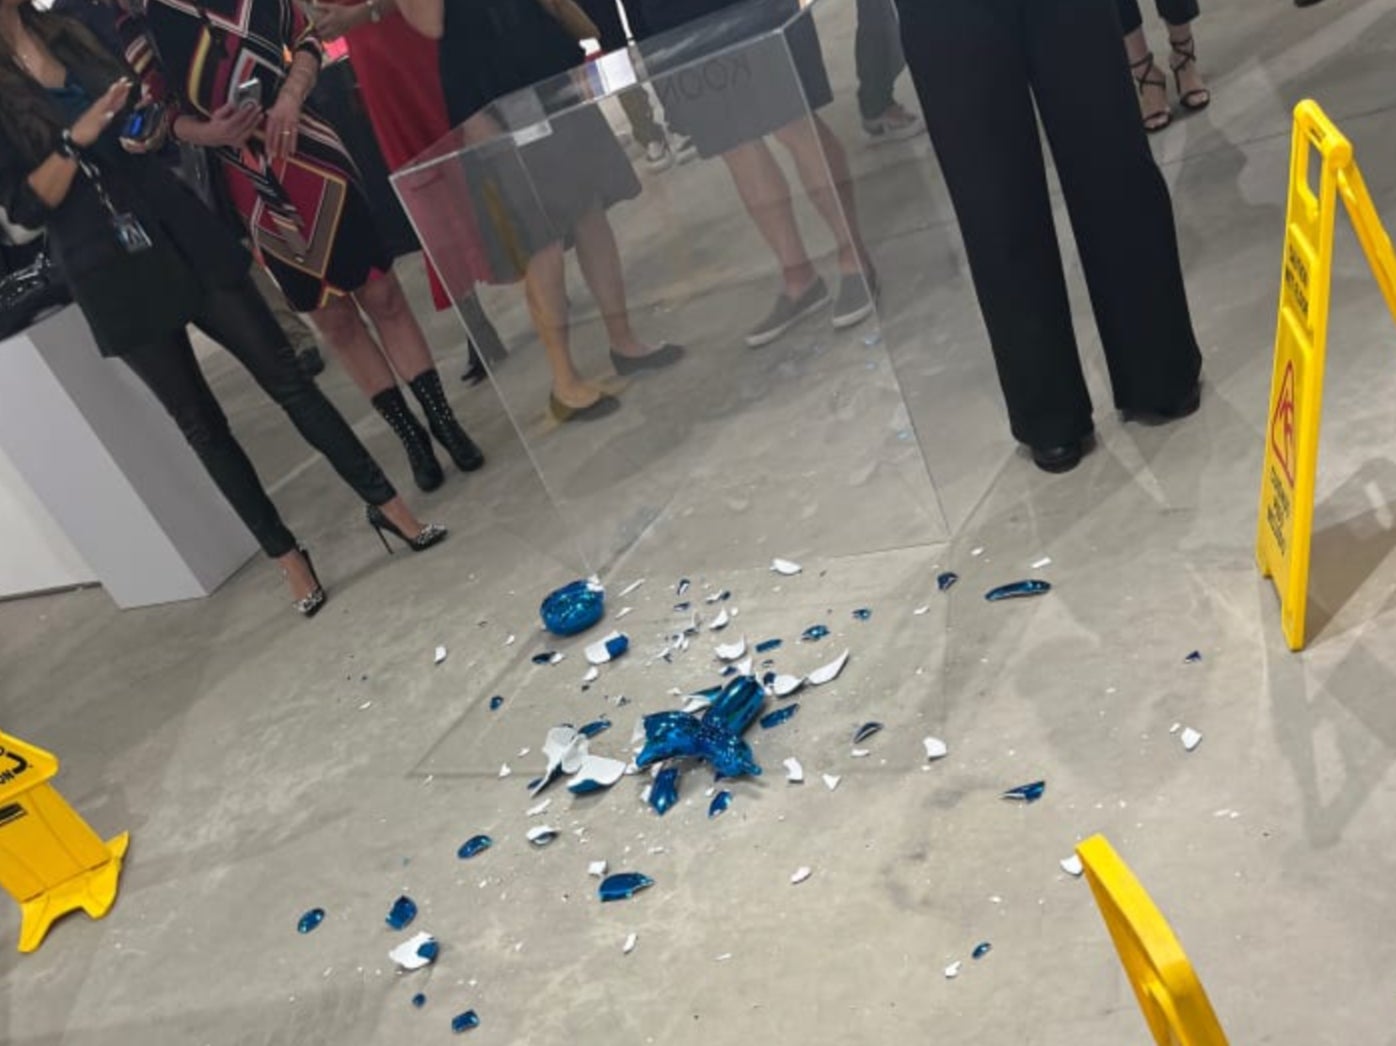 A woman accidentally smashed one of Jeff Koons’ iconic balloon dogs at a Miami art gallery